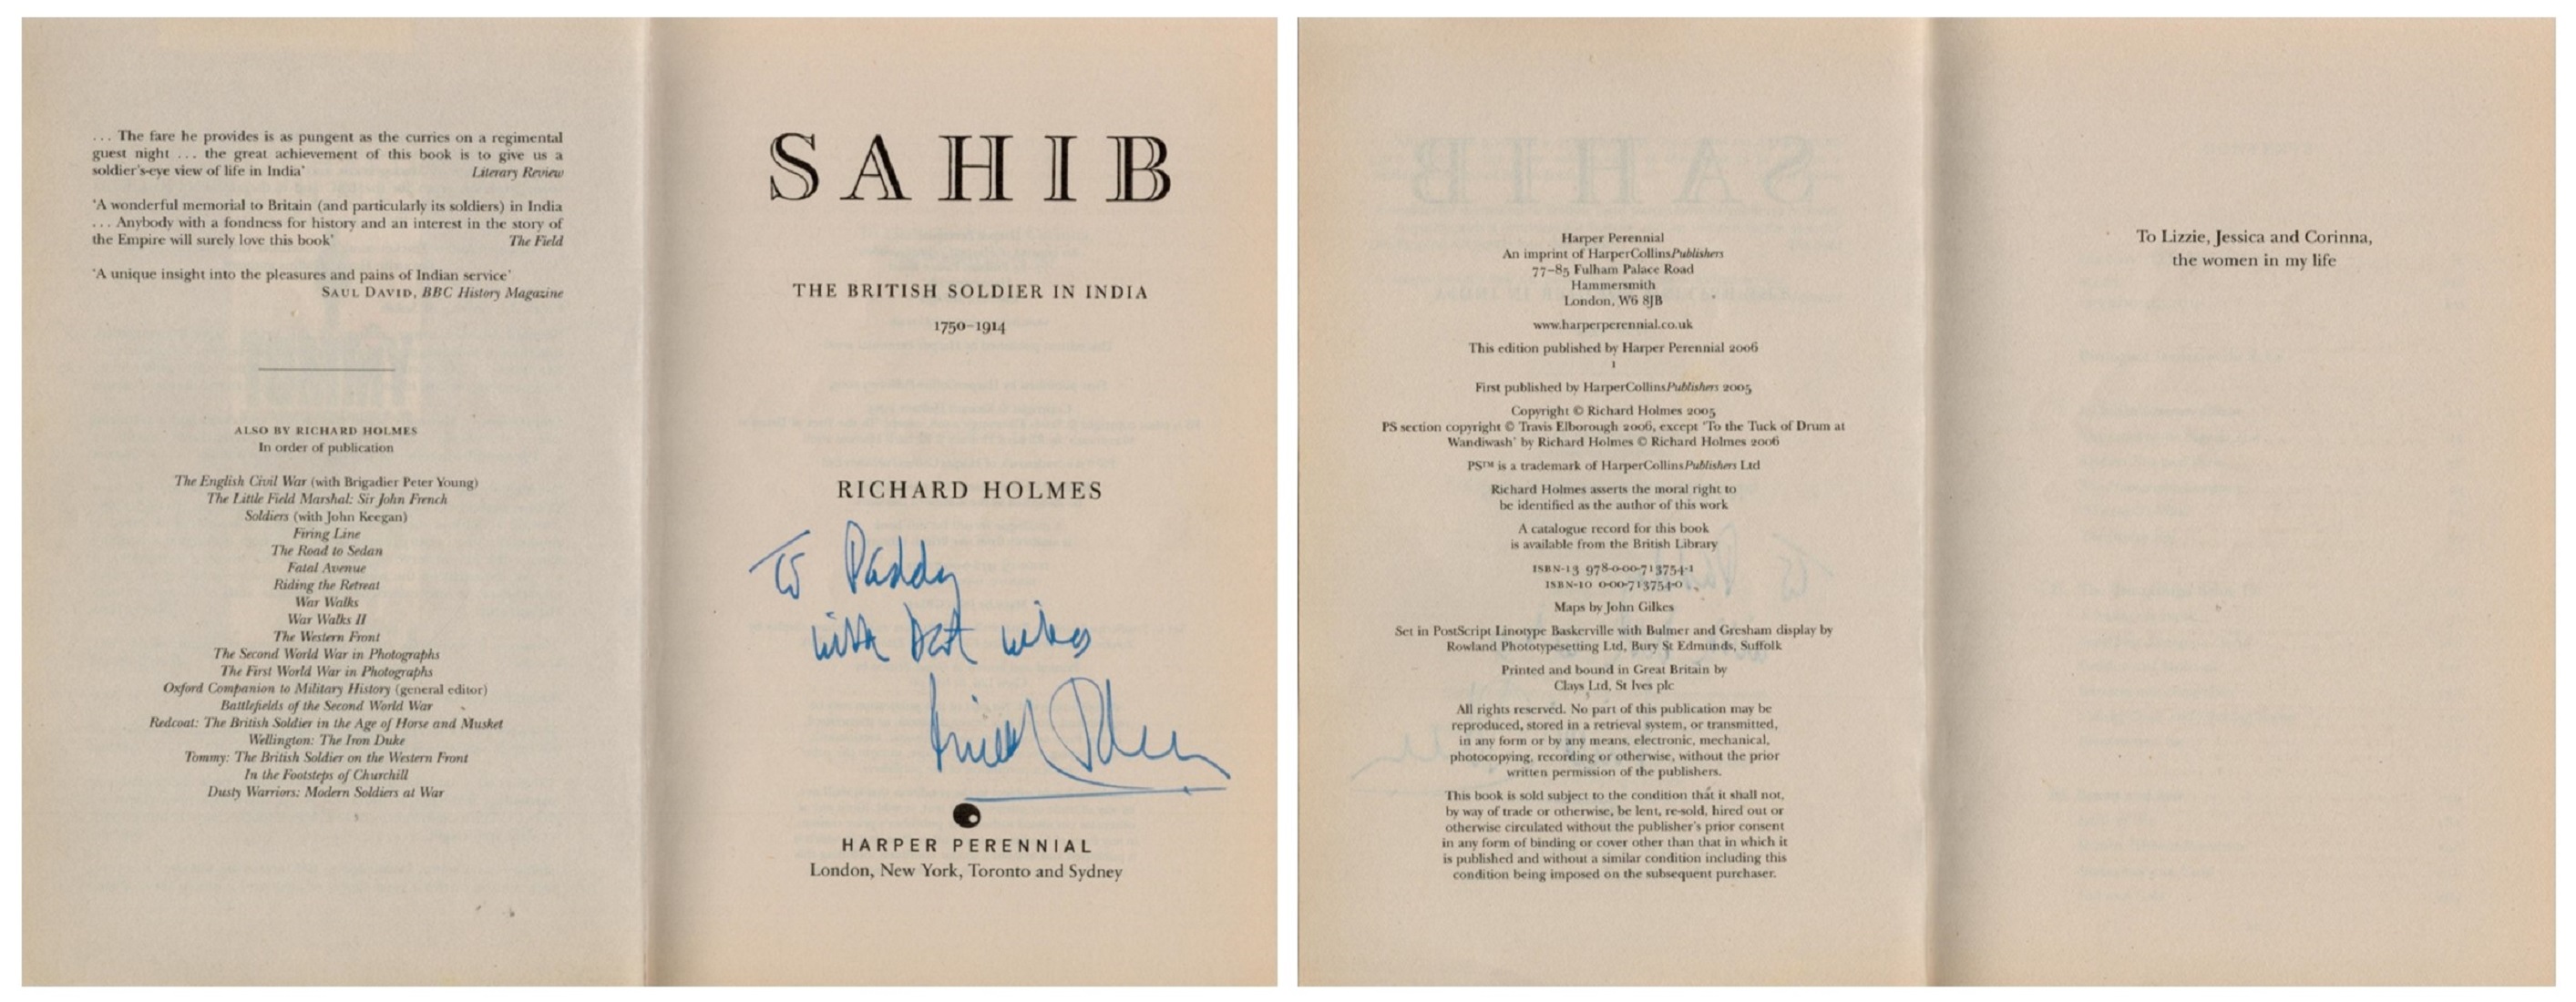 SAHIB The British Soldier In India 1750-1914 Signed by Author Richard Holmes Paperback book. - Image 5 of 6